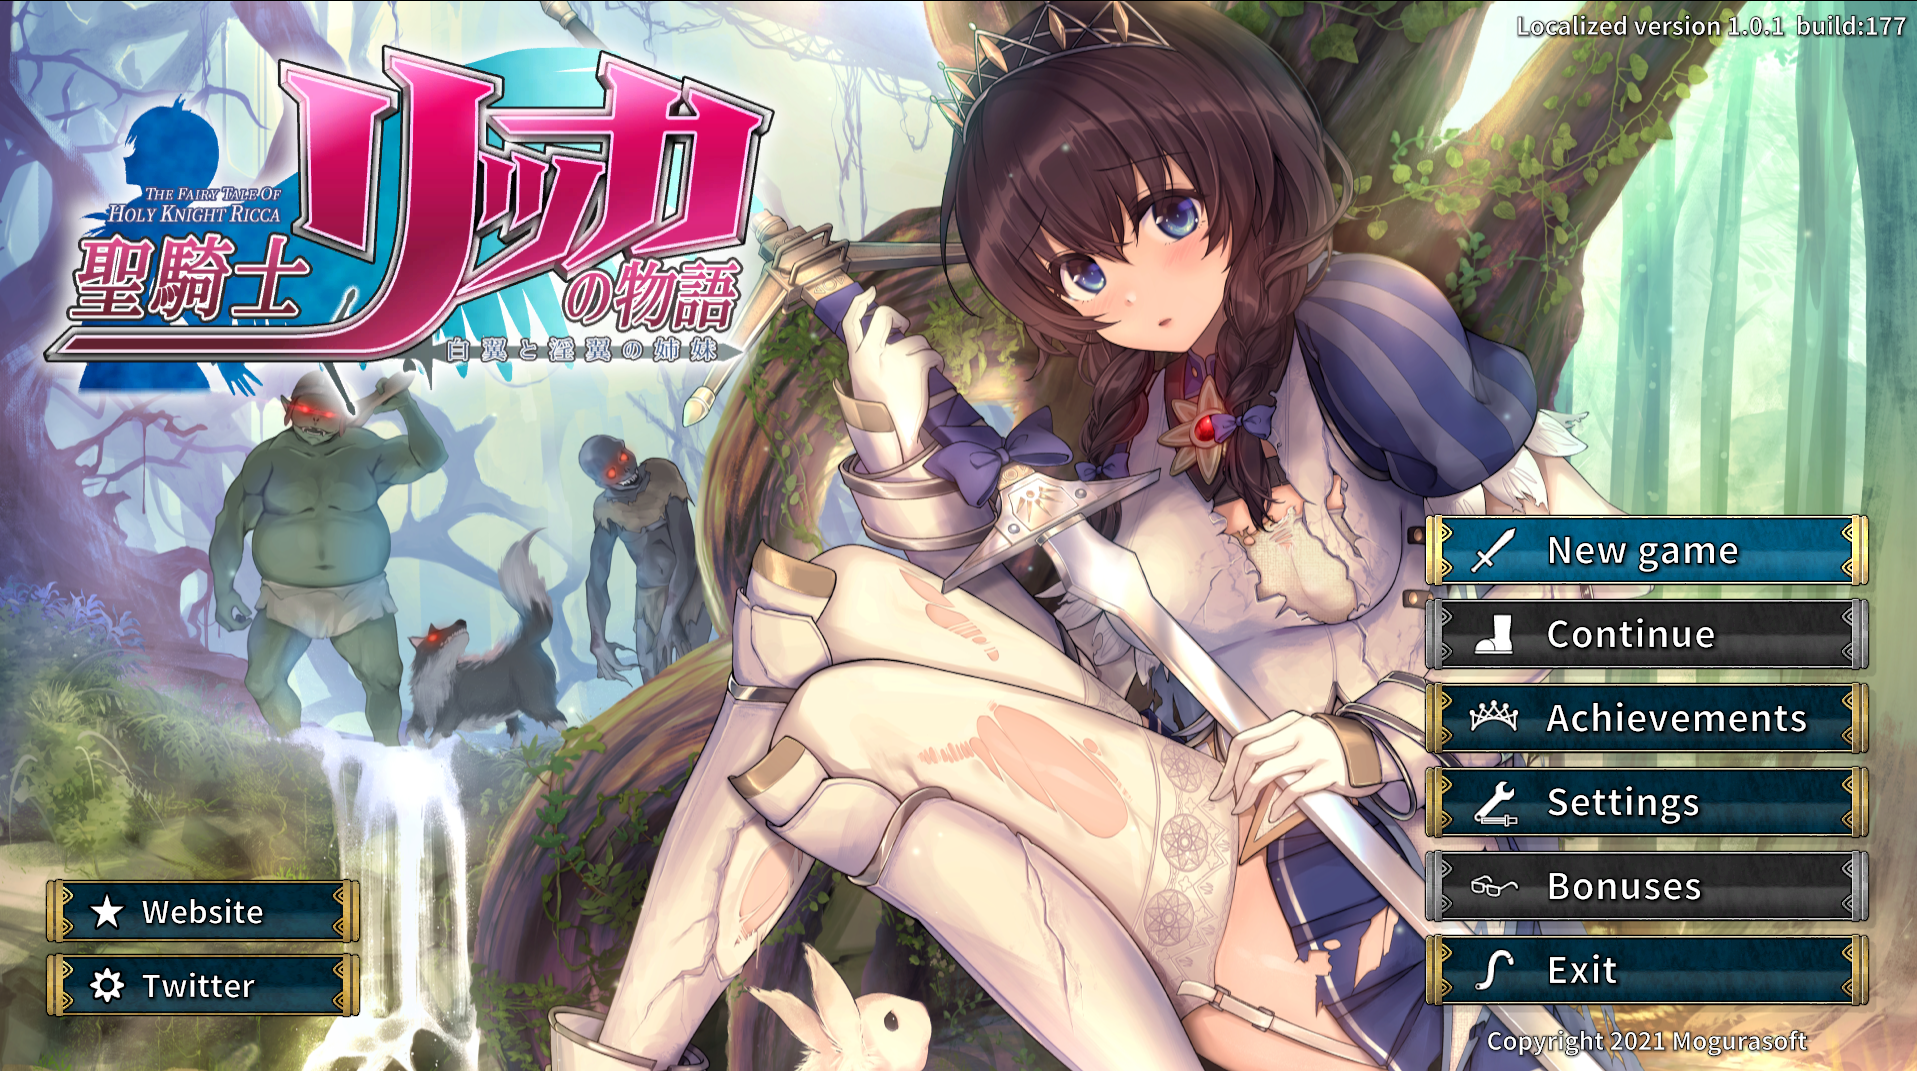 [Unity3D/橫捲戰鬥/RPG/EN]The Fairy Tale of Holy Knight Ricca Two Winged Sisters Ver.1.0.1[PC/OD/4G]